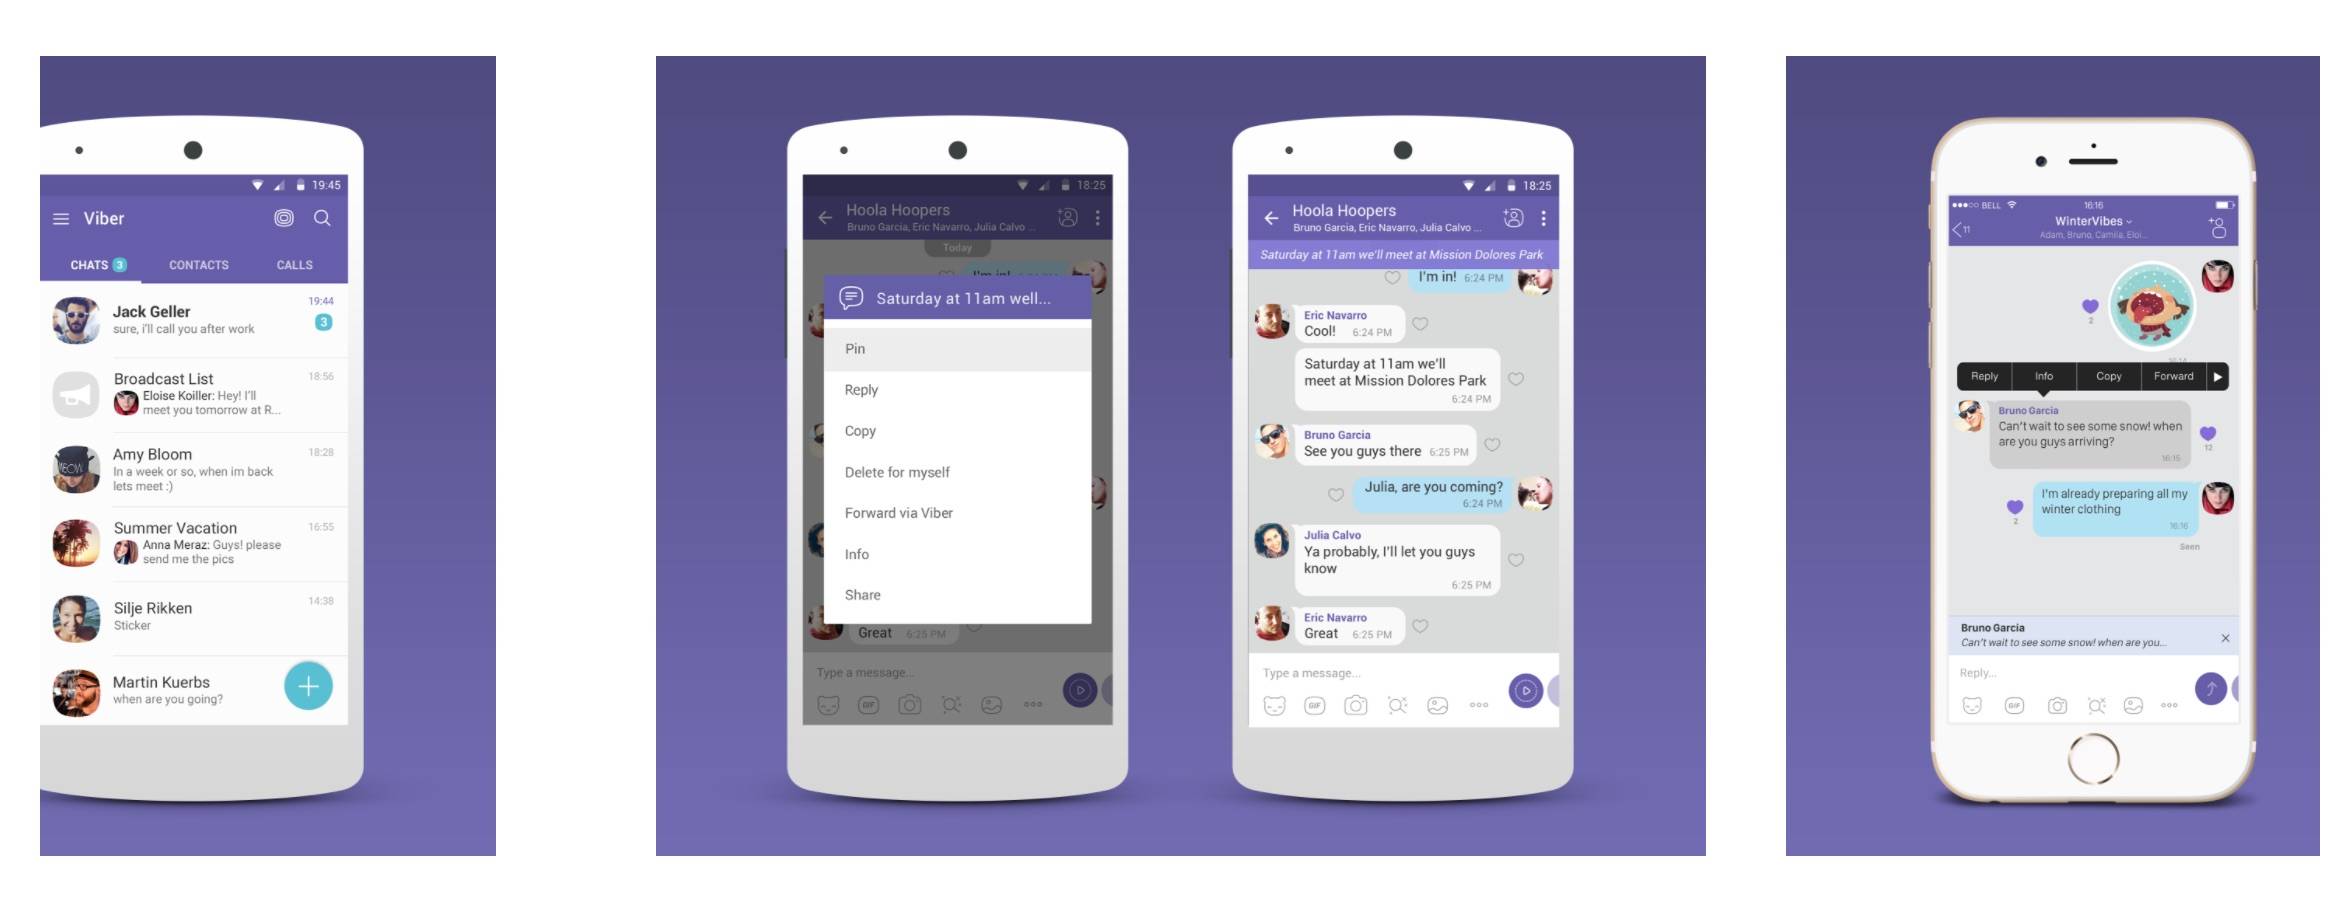 viber for android 2.1.1